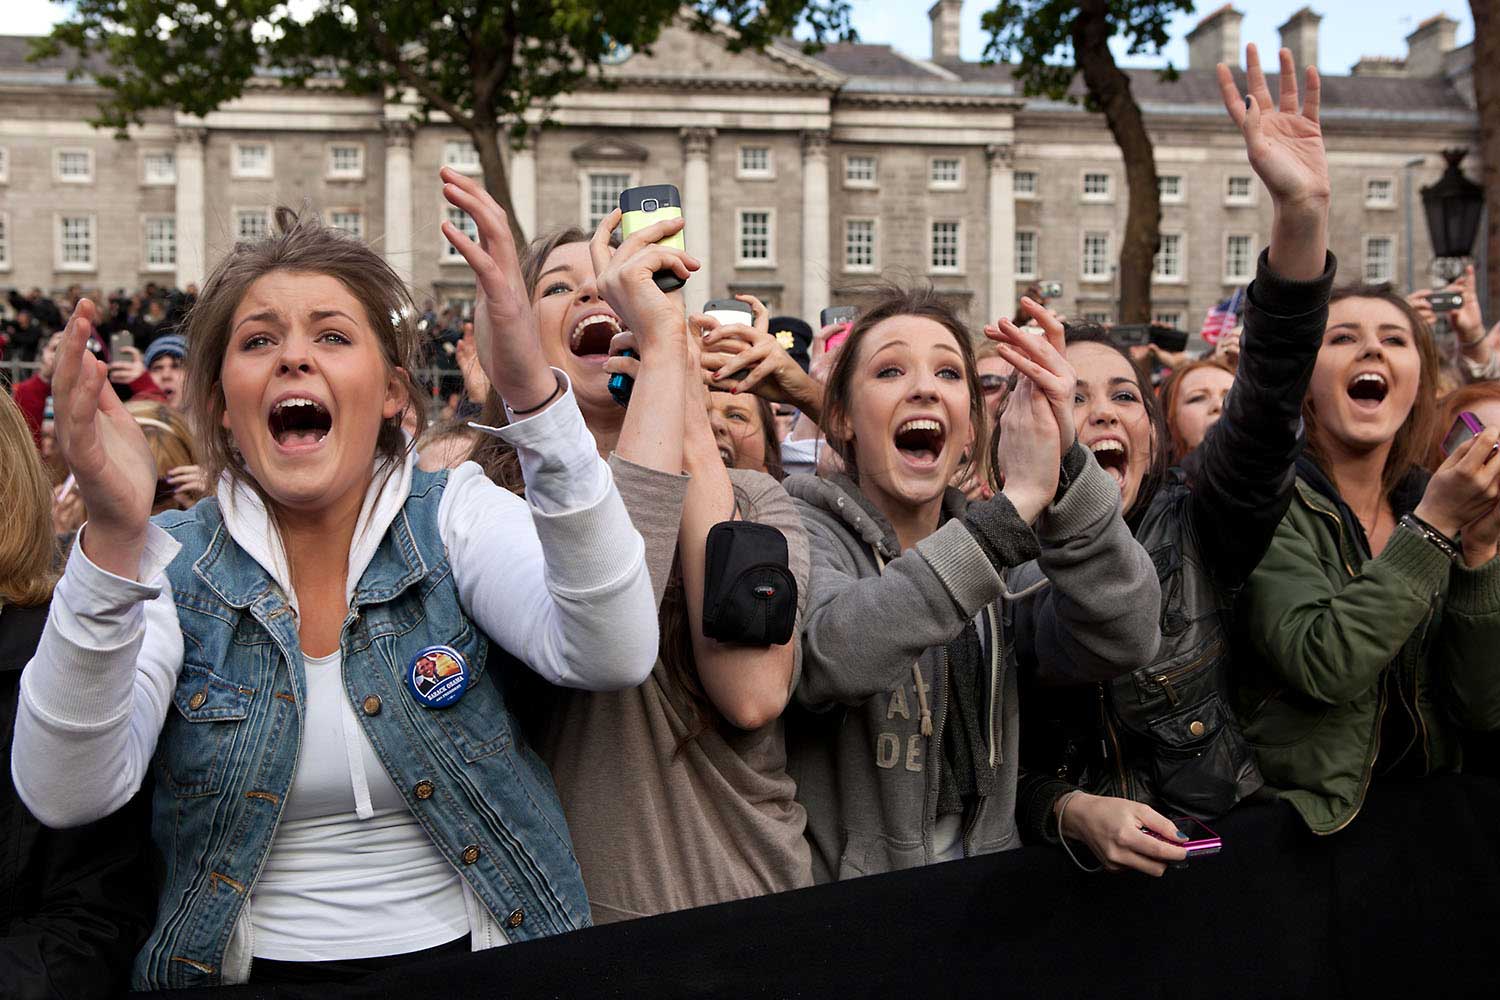 I can still hear these Irish girls screaming, 'Barack! Barack! Michelle! Michelle!' It reminded me of the old black and white video footage of American girls screaming at the Beatles in concert. These girls were cheering as the President and First Lady took the stage at the College Green in Dublin, Ireland, May 23, 2011.